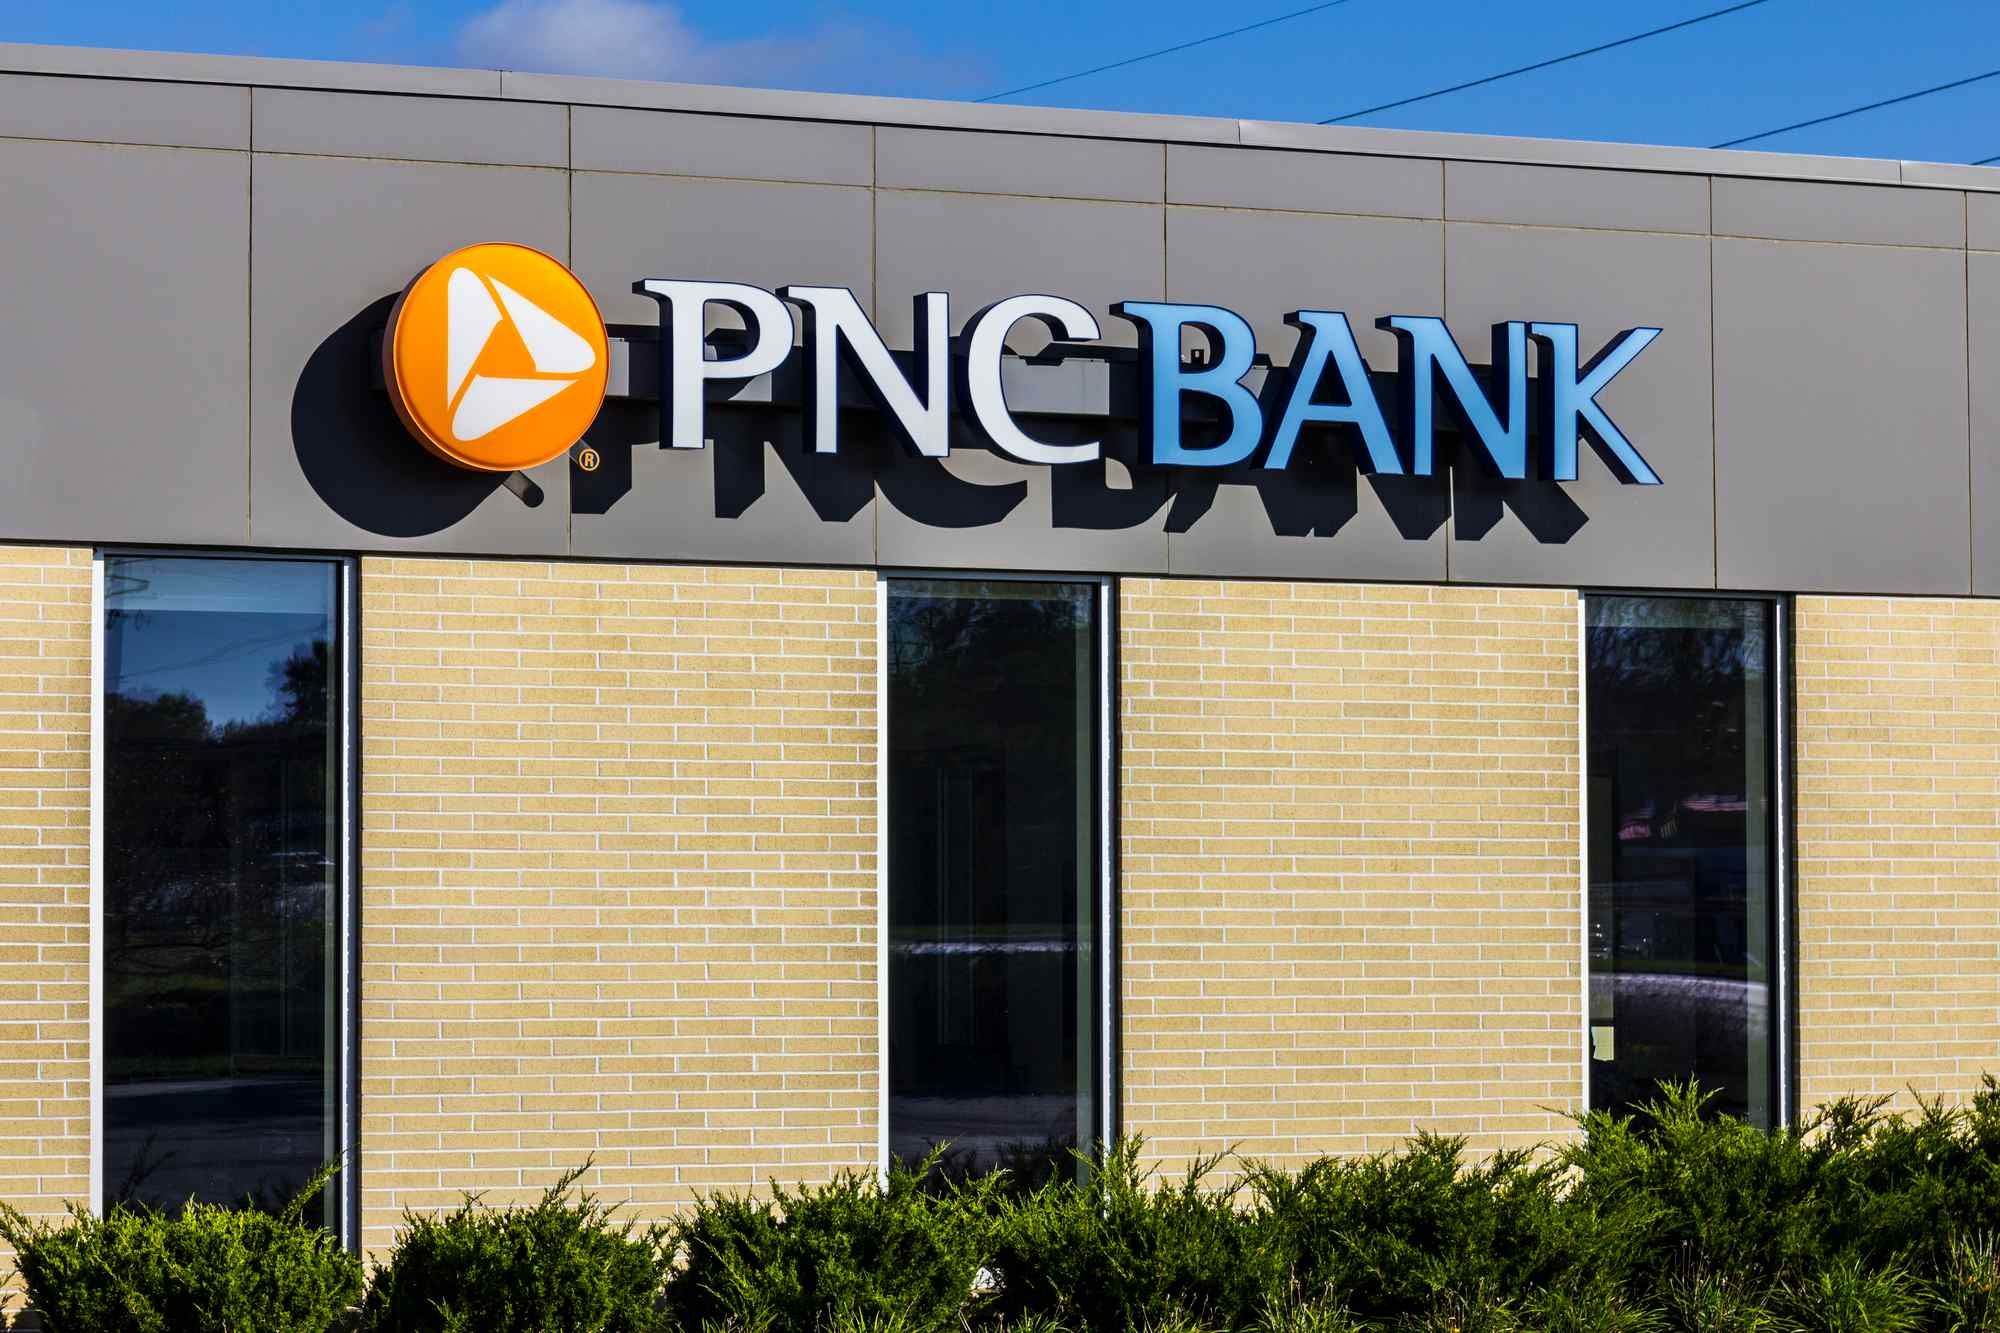 PNC Bank Fraudulently Kept Millions of Dollars in Unearned GAP Fees, Class Action Lawsuit Alleges